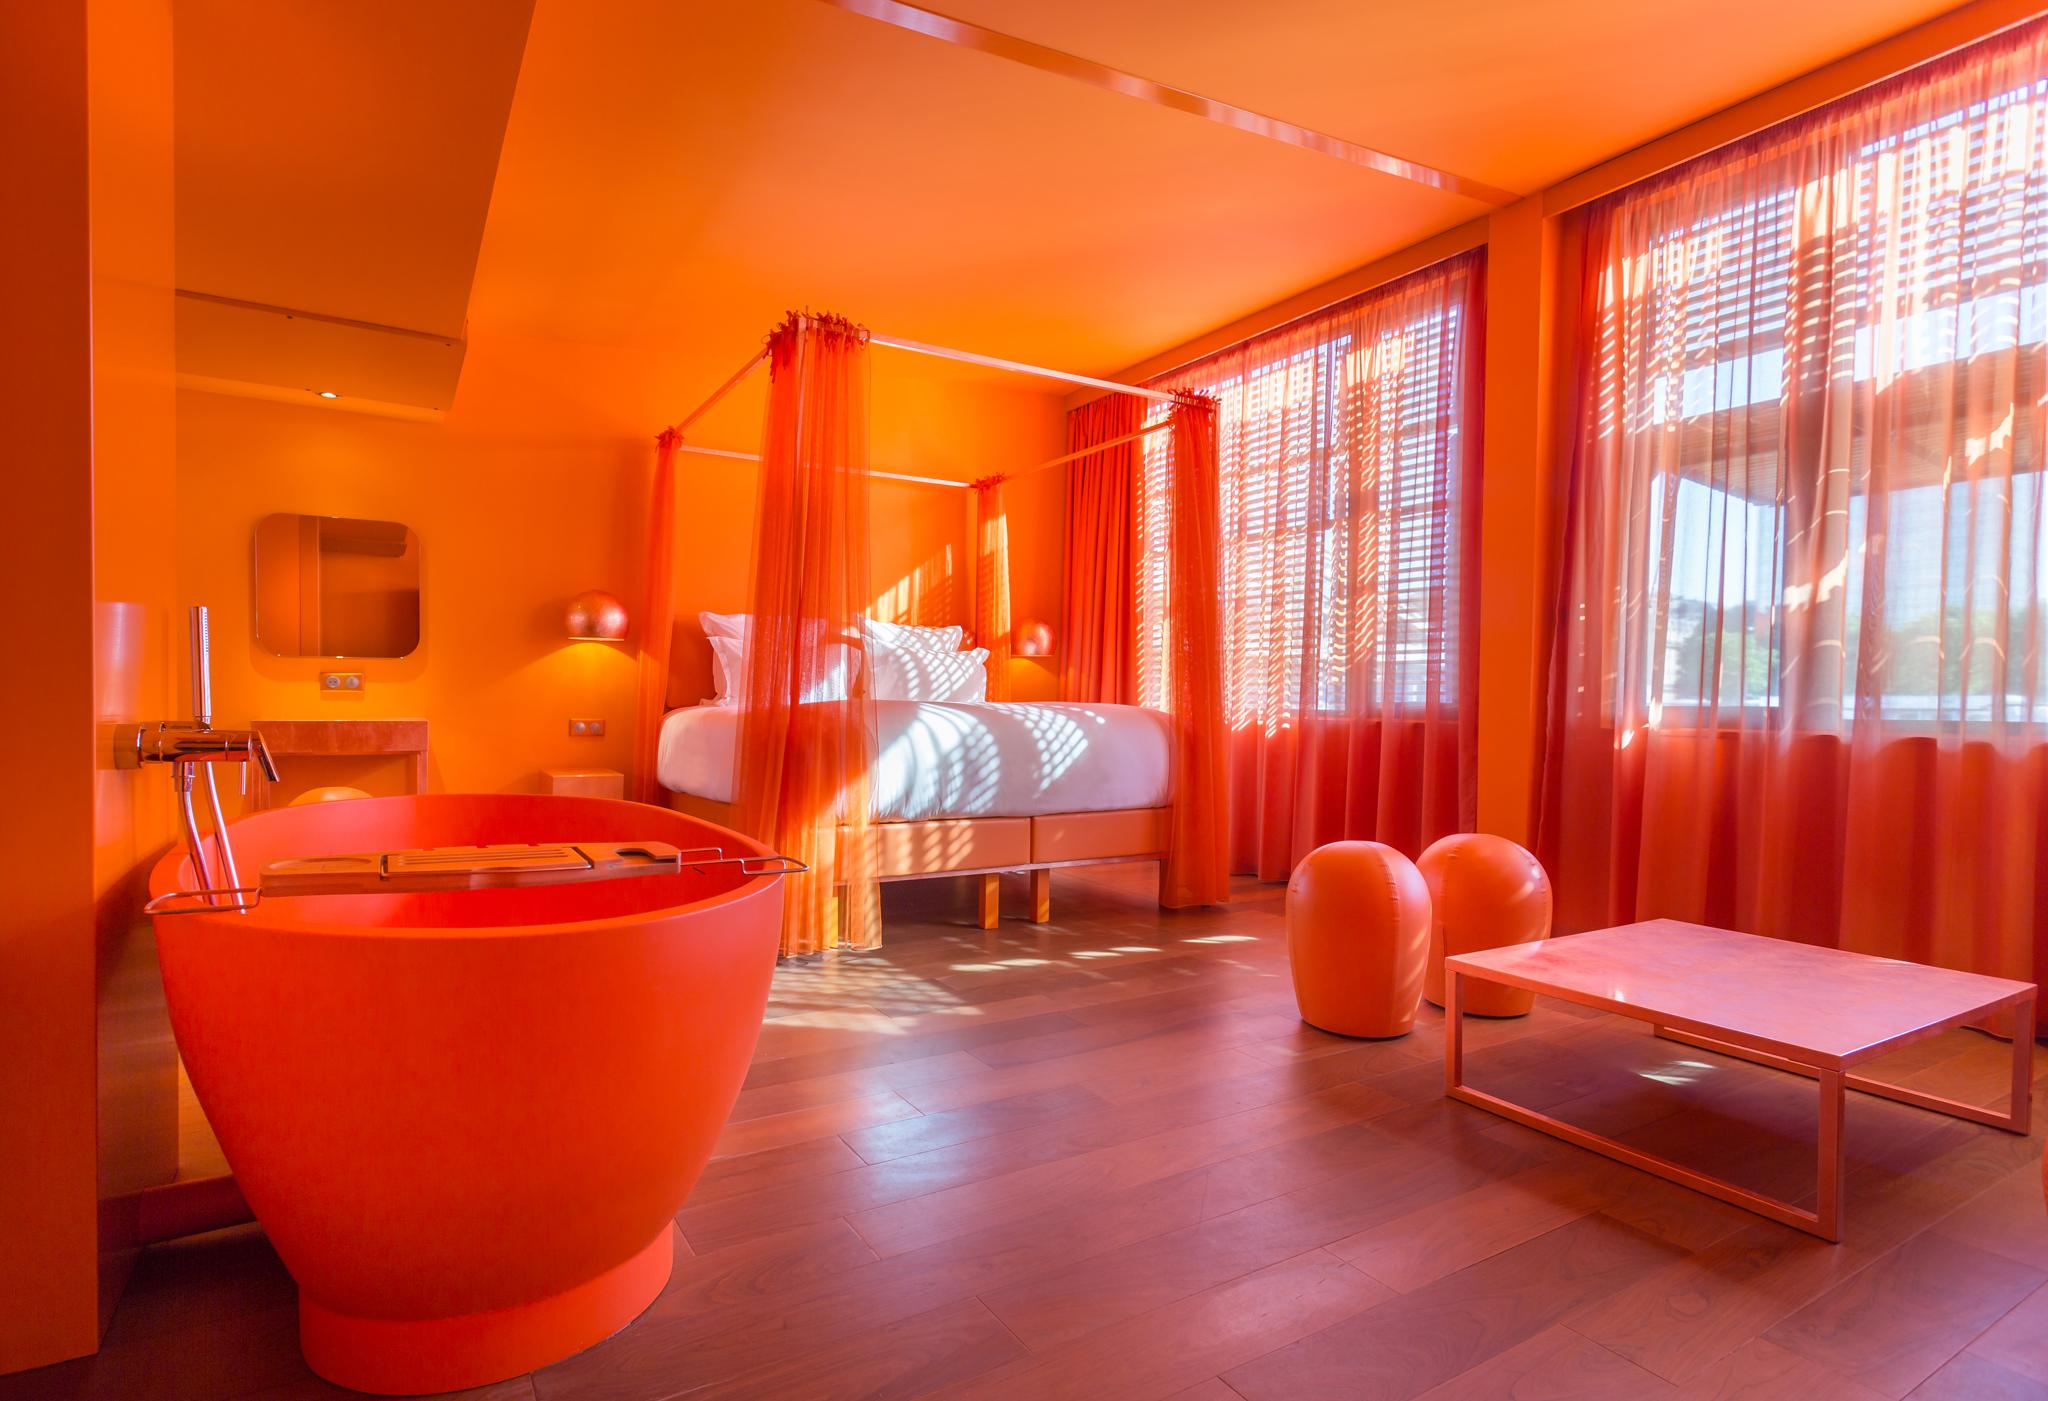 The Designer Sunset Suite is sure to brighten up your stay